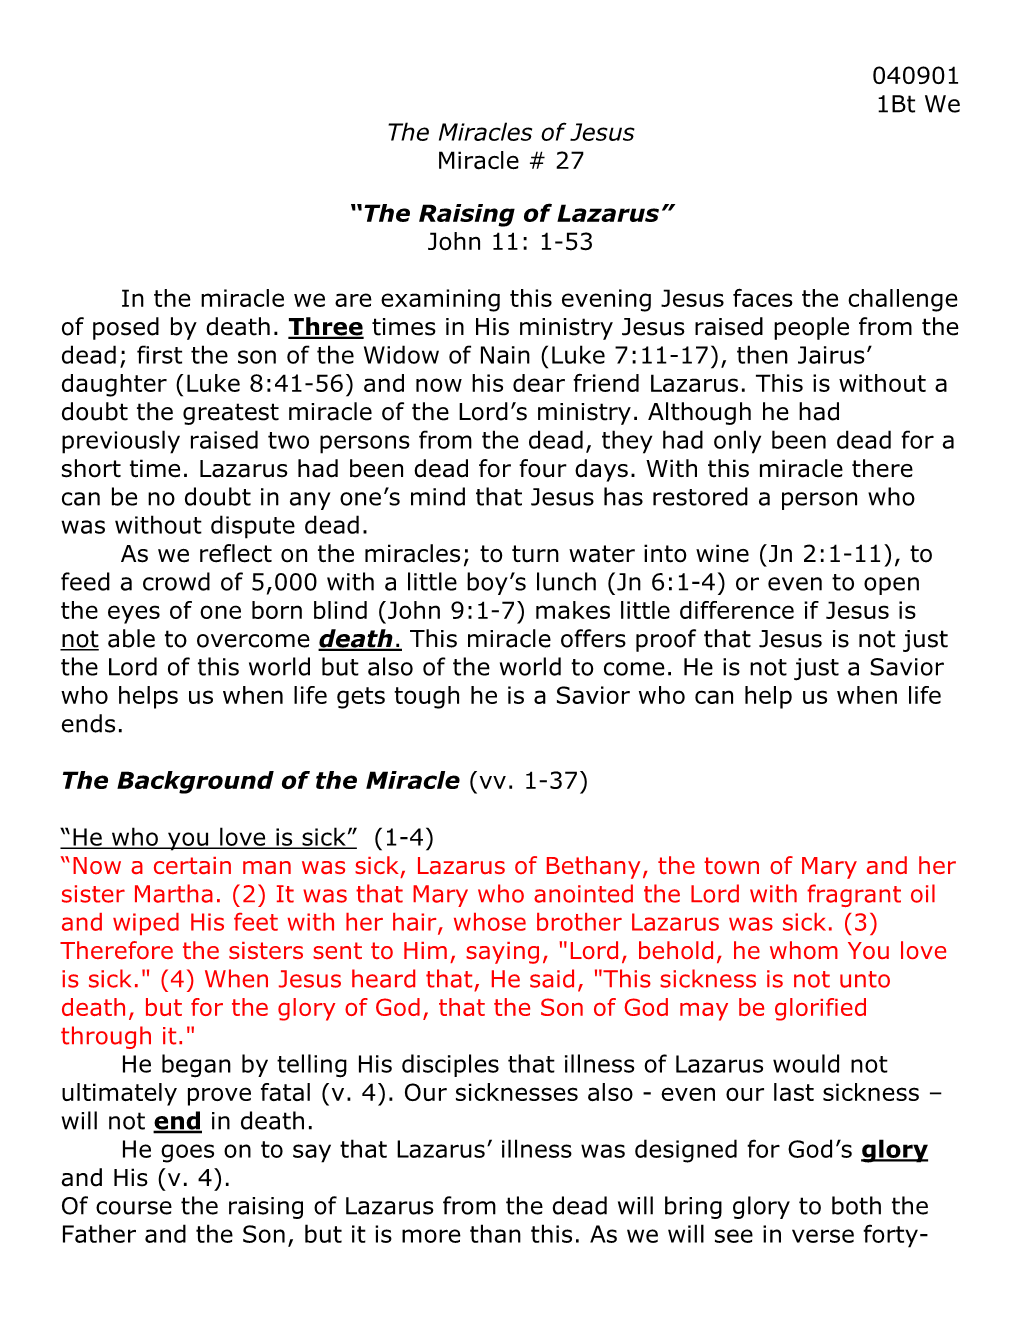 “The Raising of Lazarus” John 11: 1-53 in the Miracle We Are